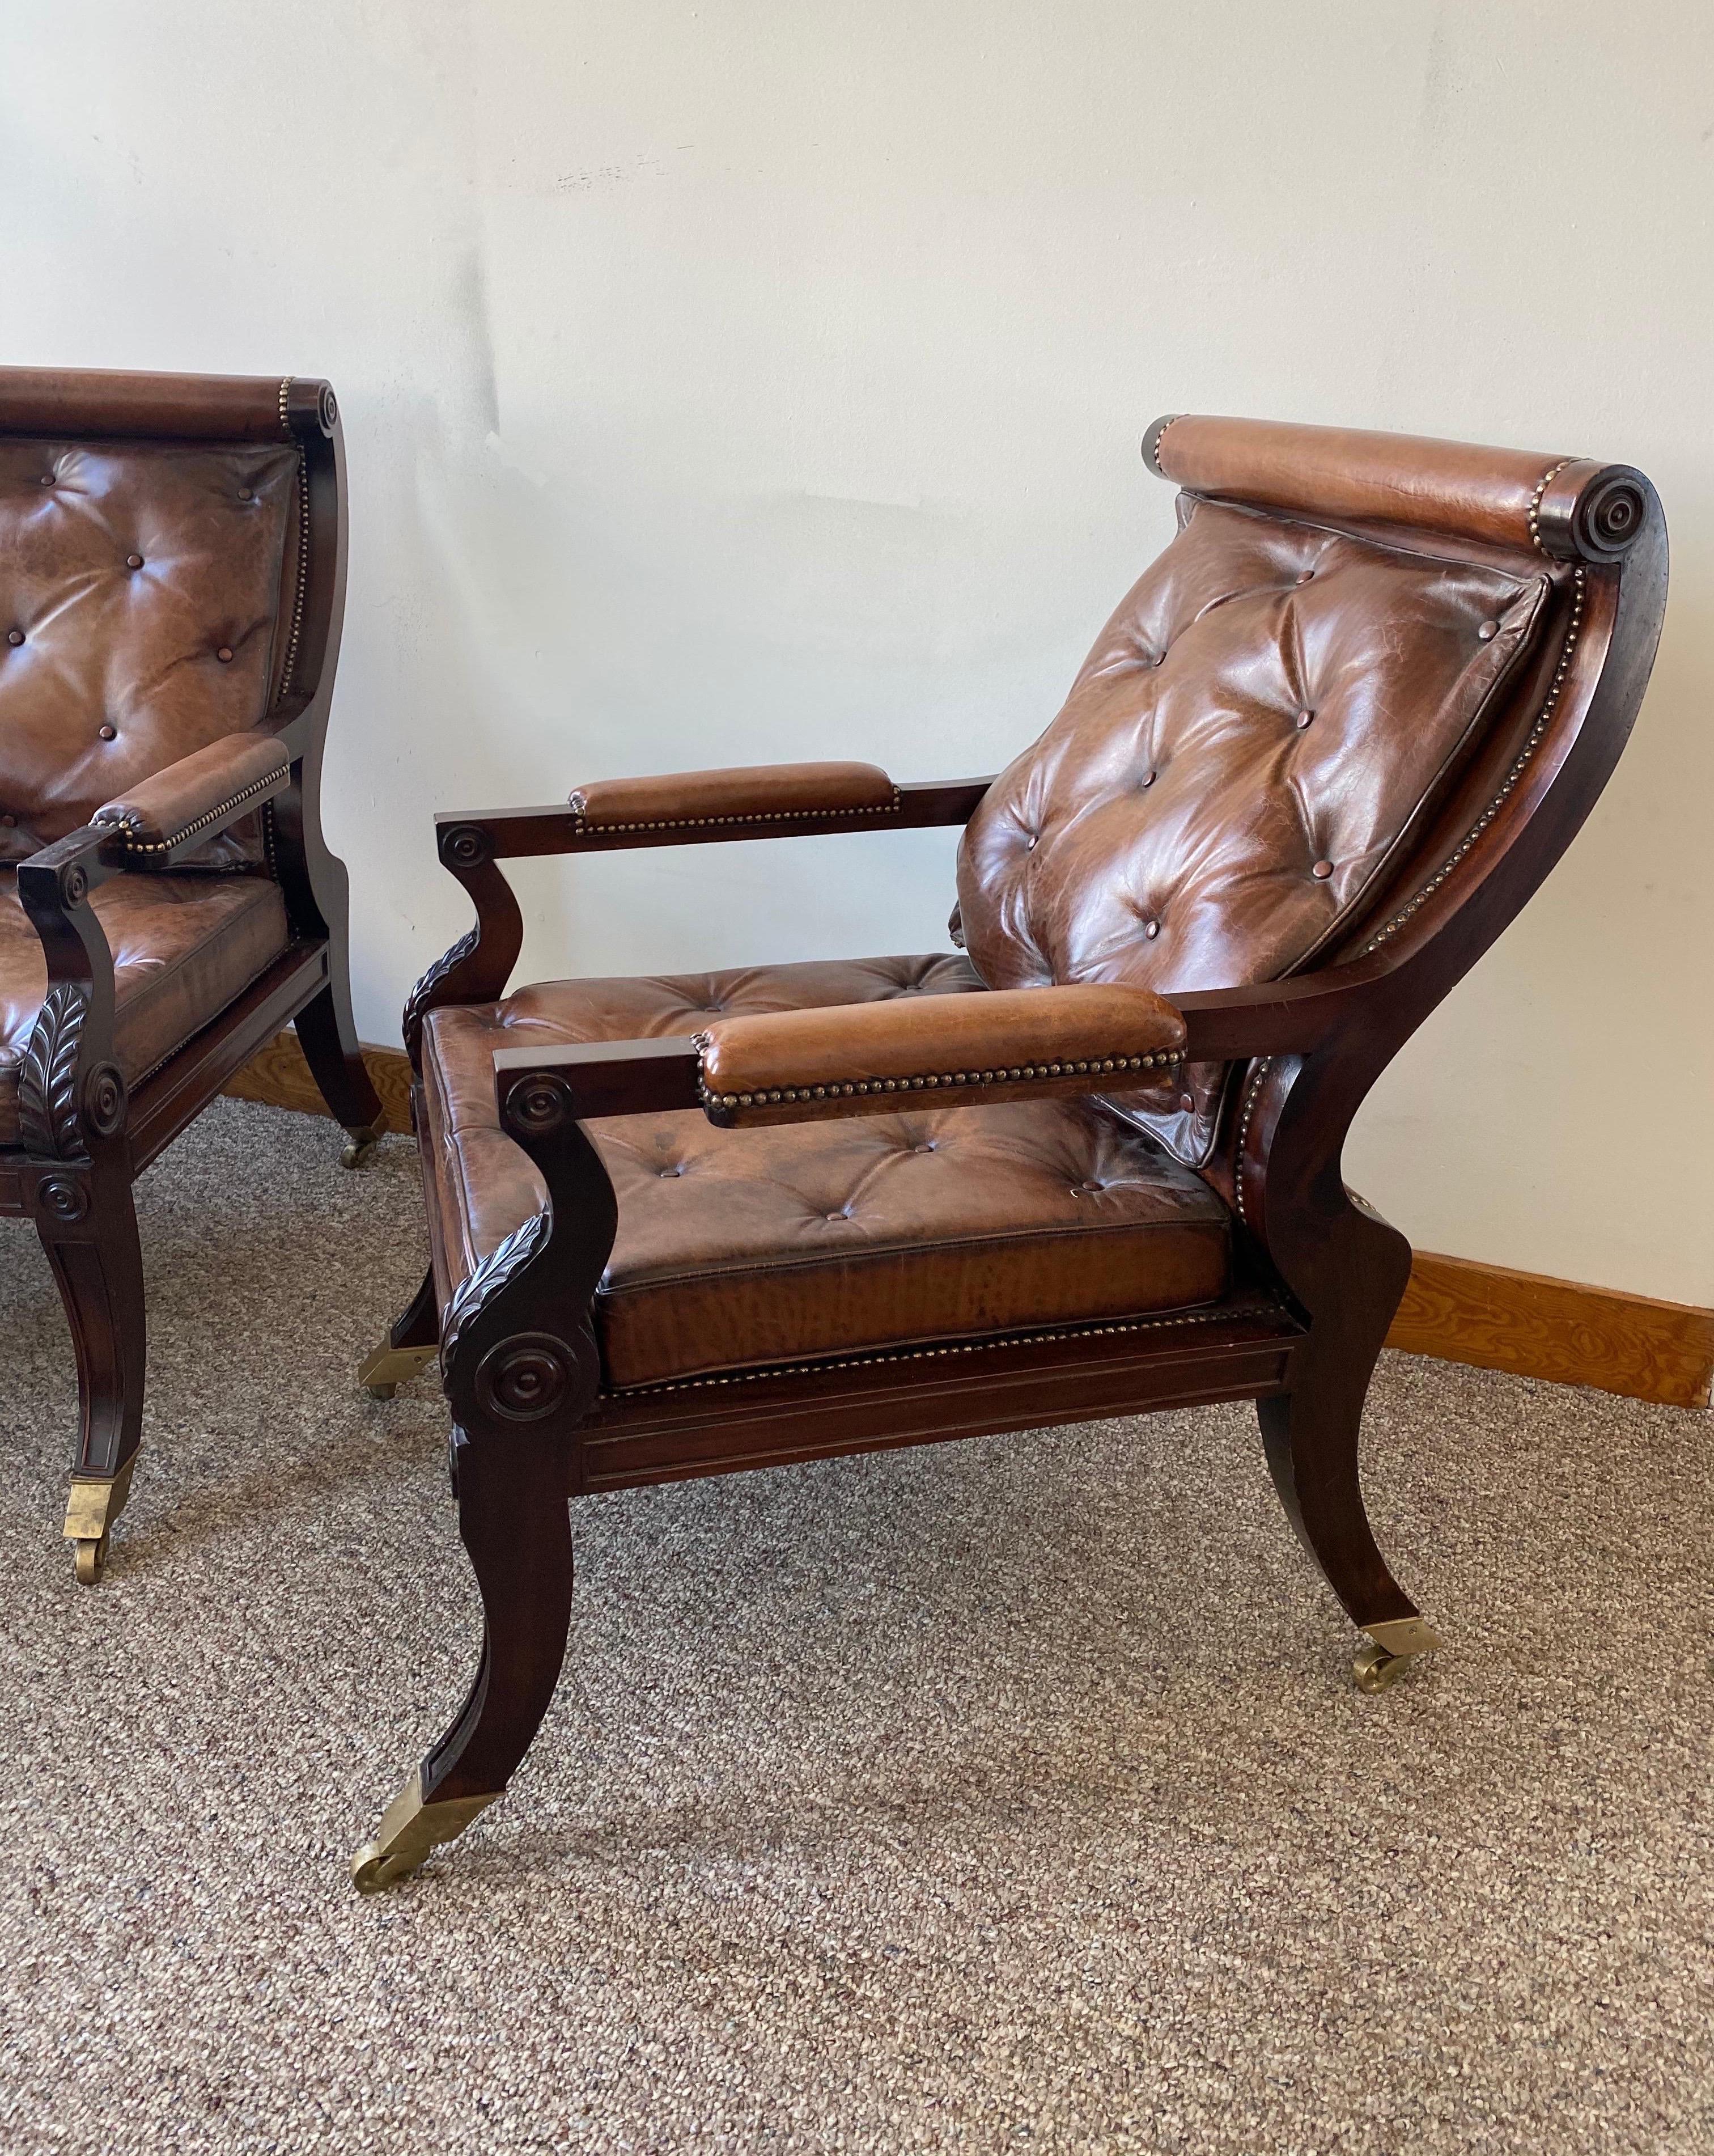 Superb Pair of Regency Style Mahogany and Leather Library Chairs, after Gillows 1